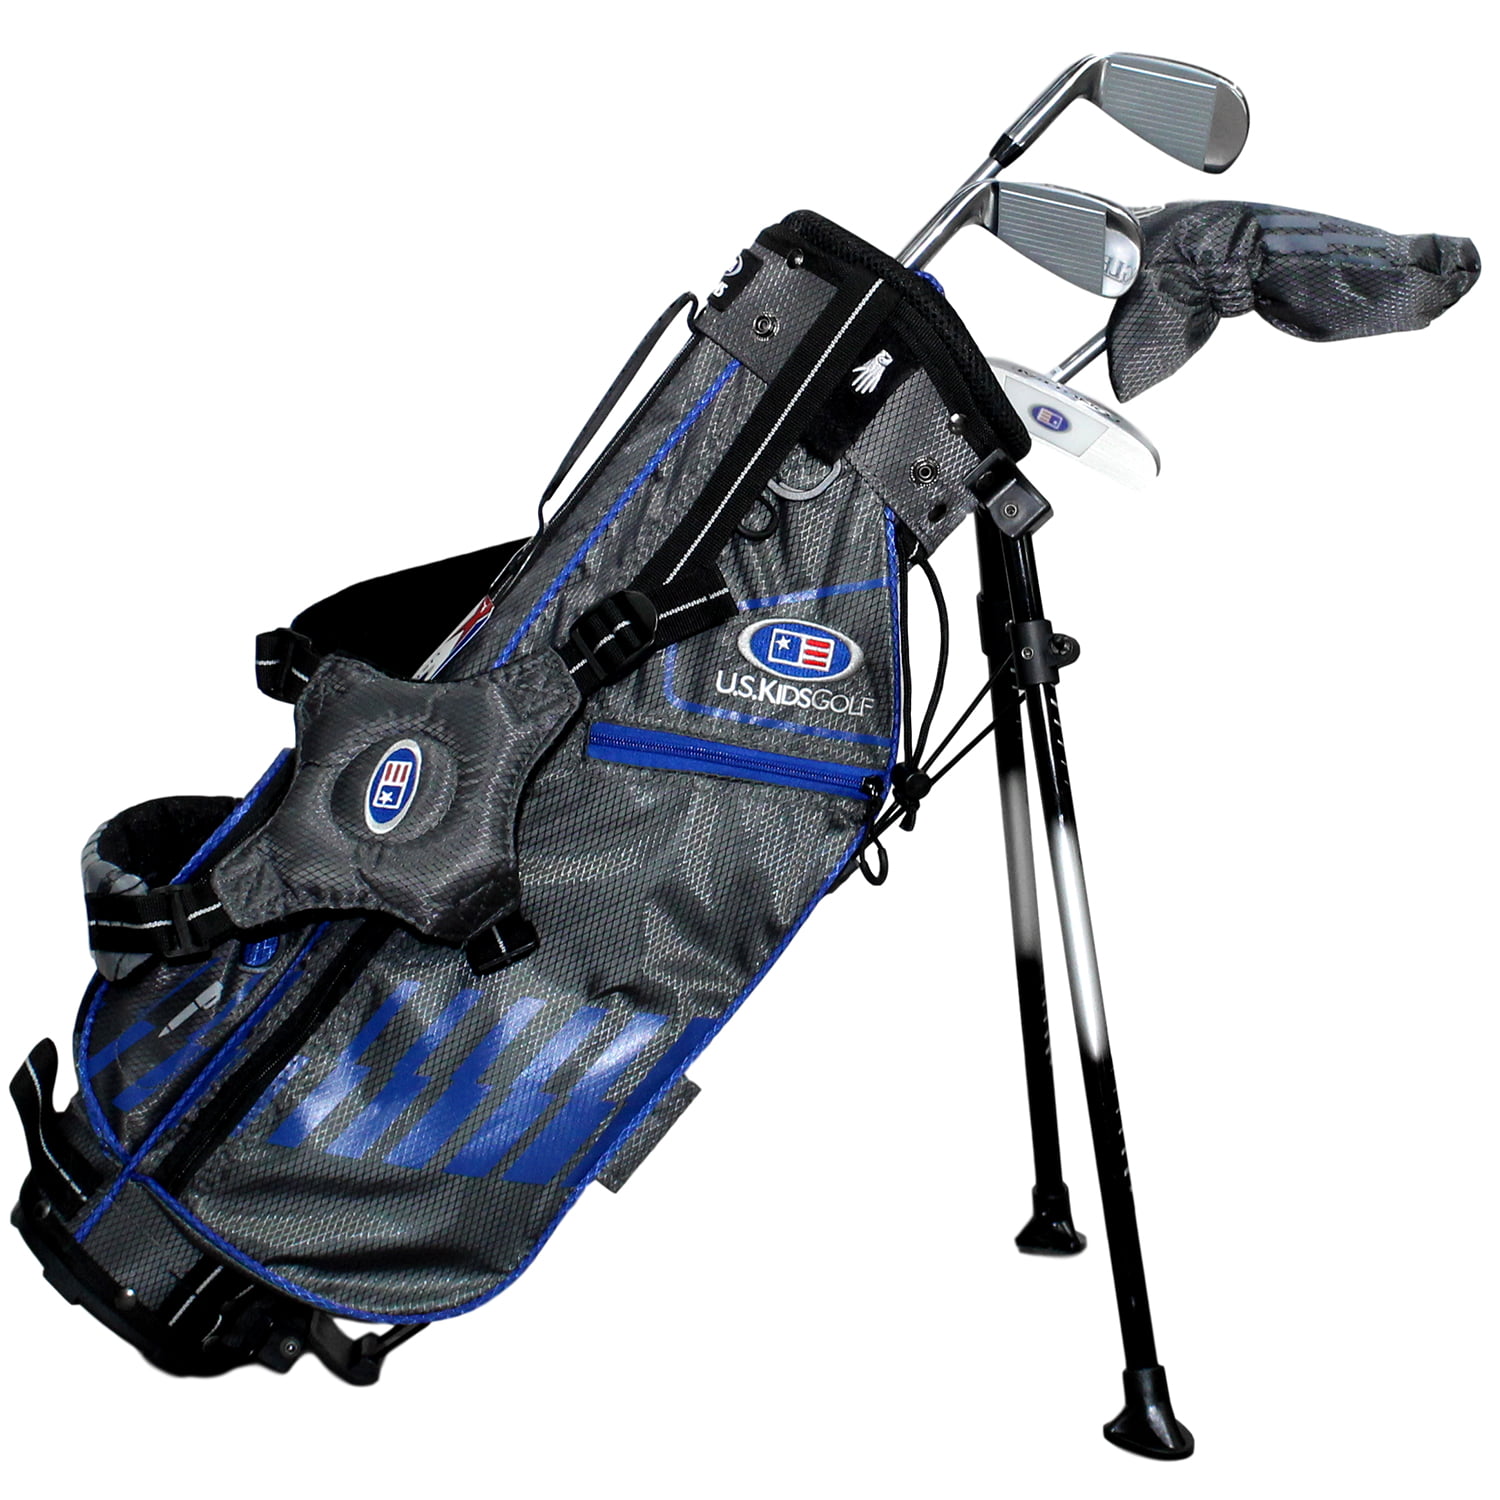 US Kids Golf UL45 4-Piece Club Set with Bag for Height 45-48